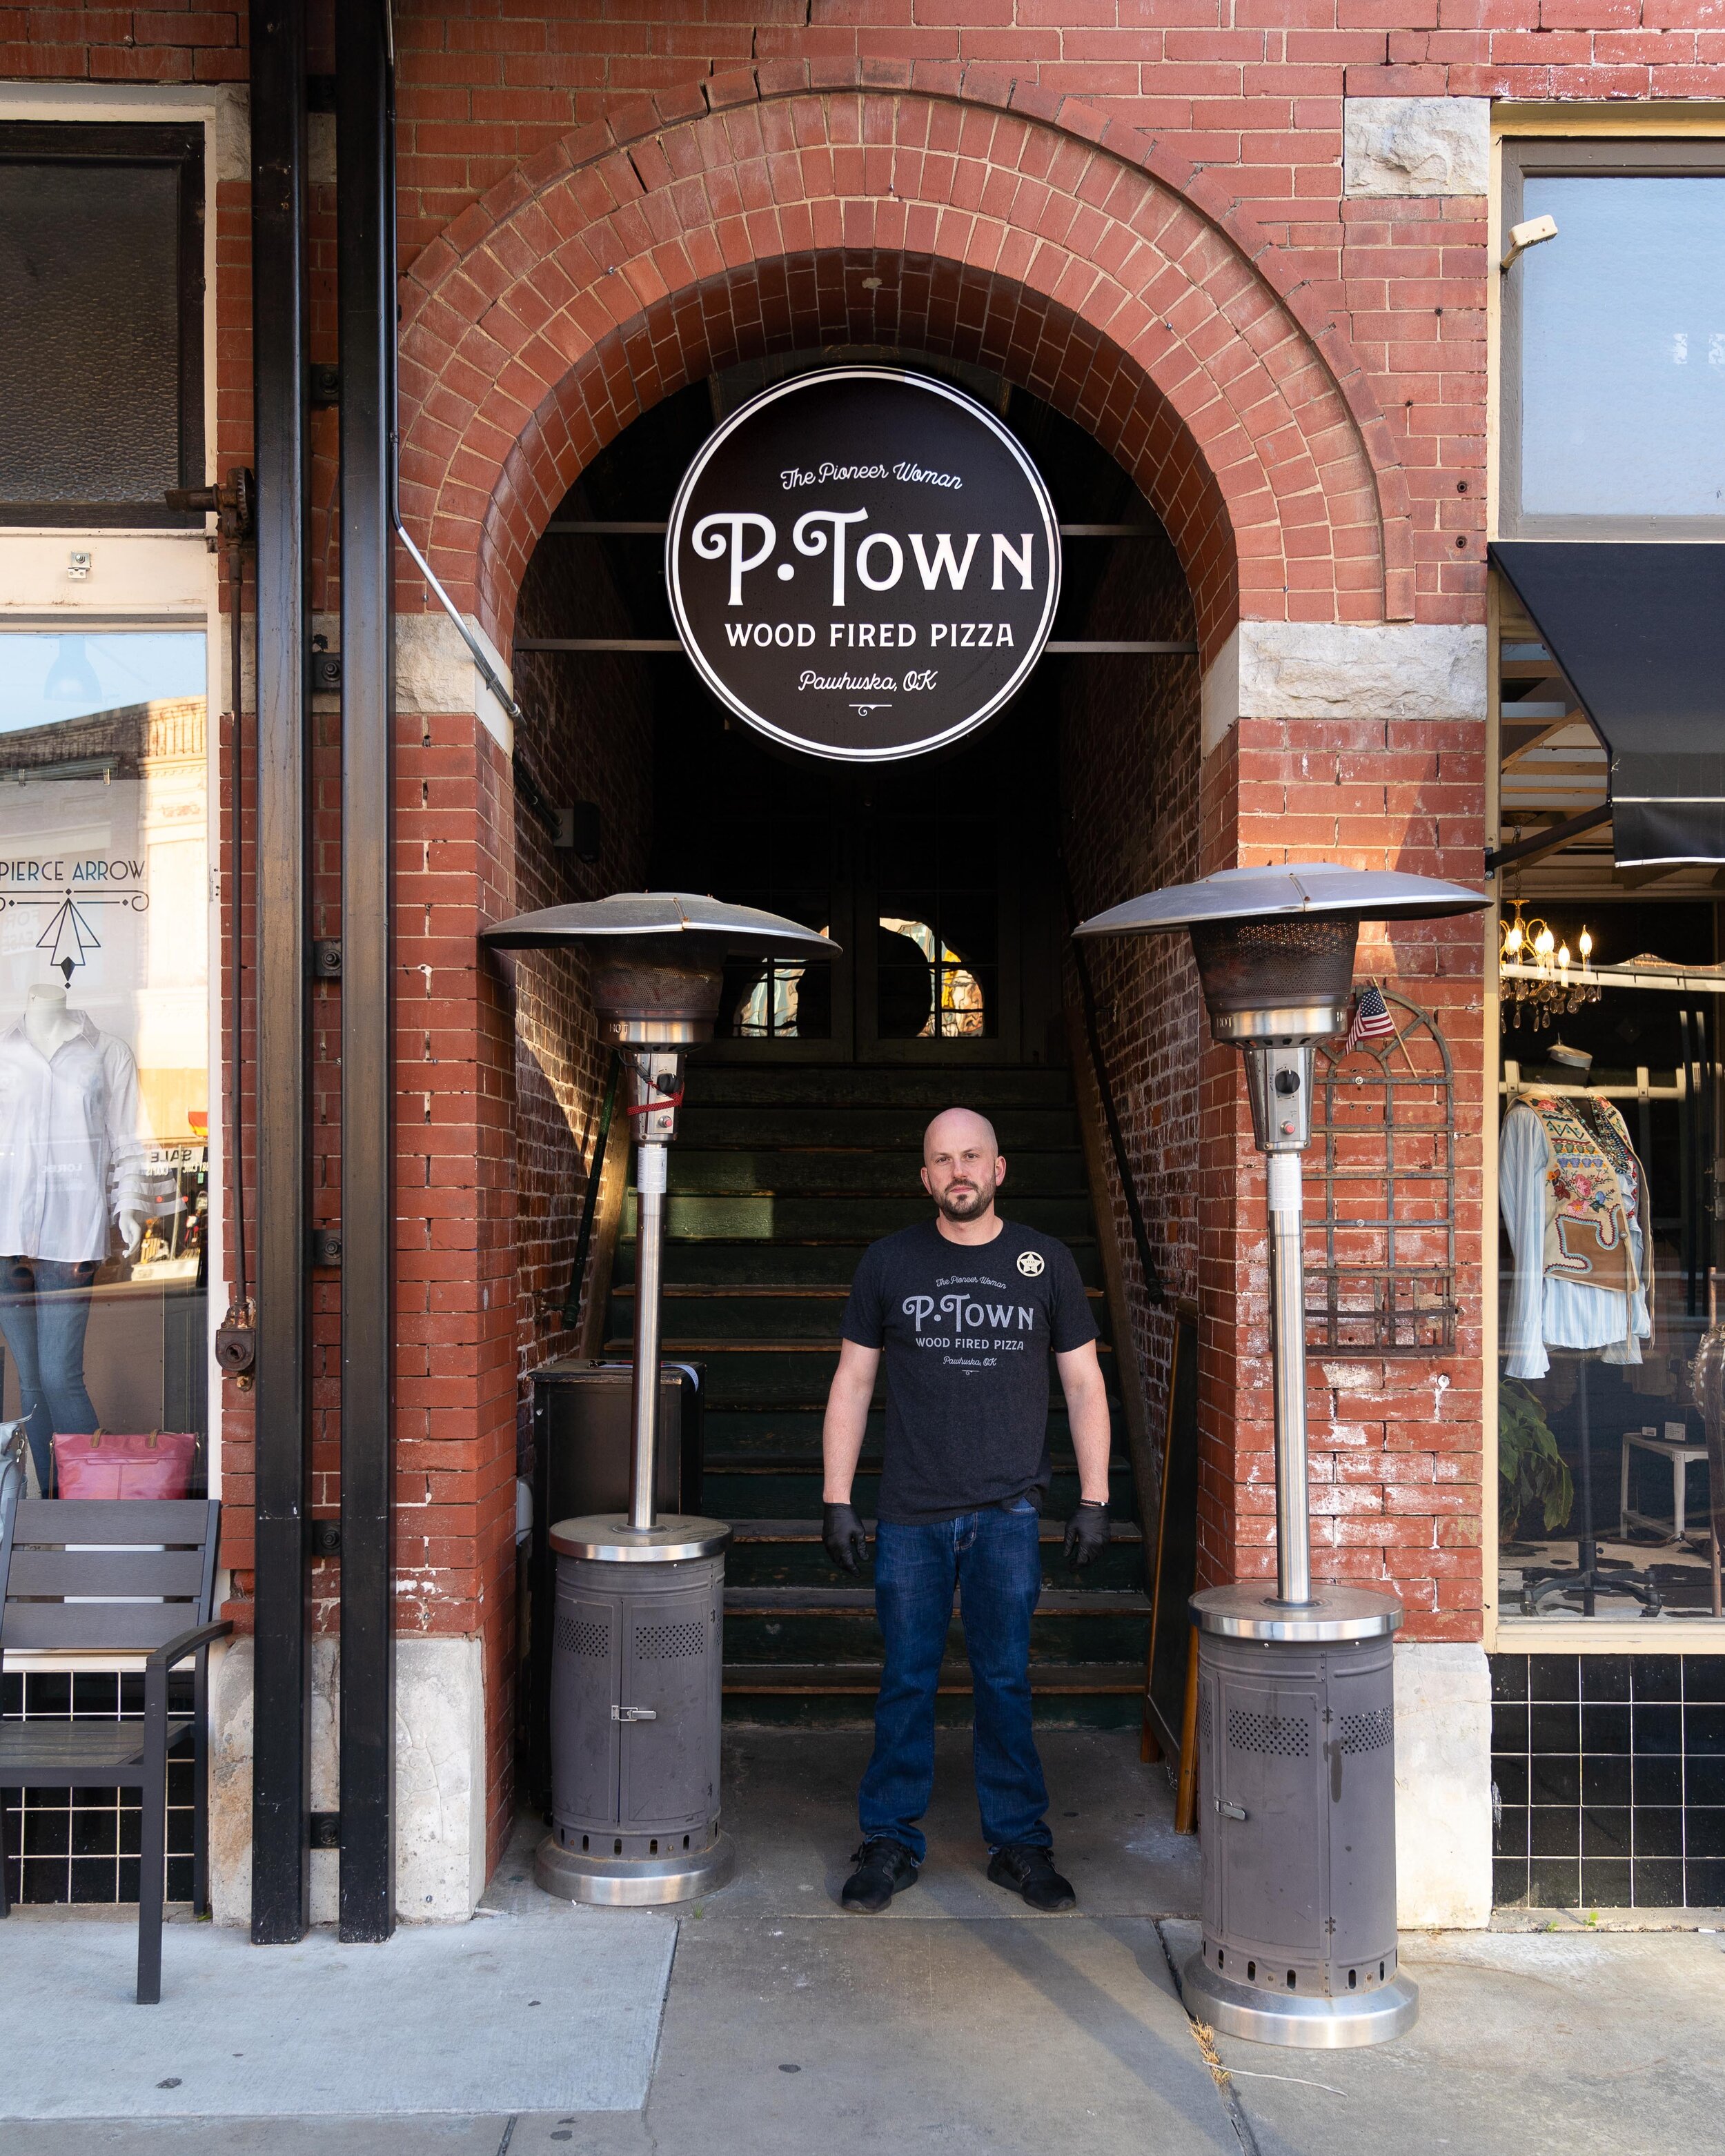  “This town came up almost overnight when some key people invested into it. Most of these shops and restaurants you see around here are new, the downtown area is alive now... well not exactly right now, but compared to only a few years ago, this is s